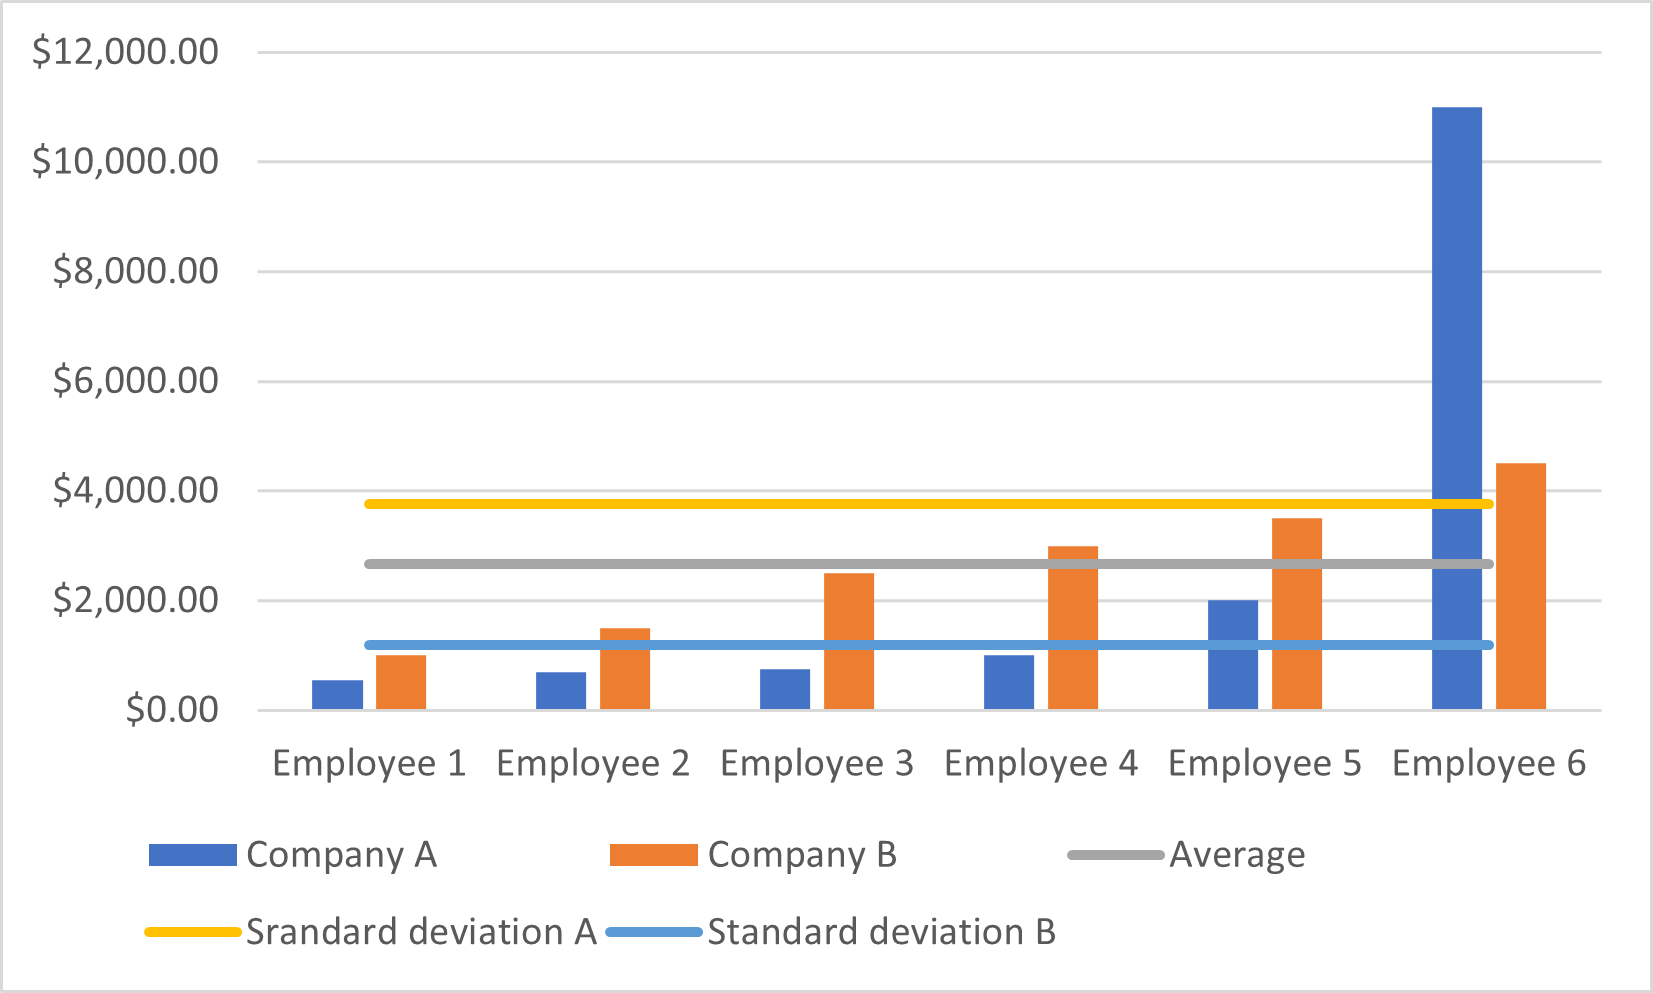 Standard deviation values plotted with the original data values